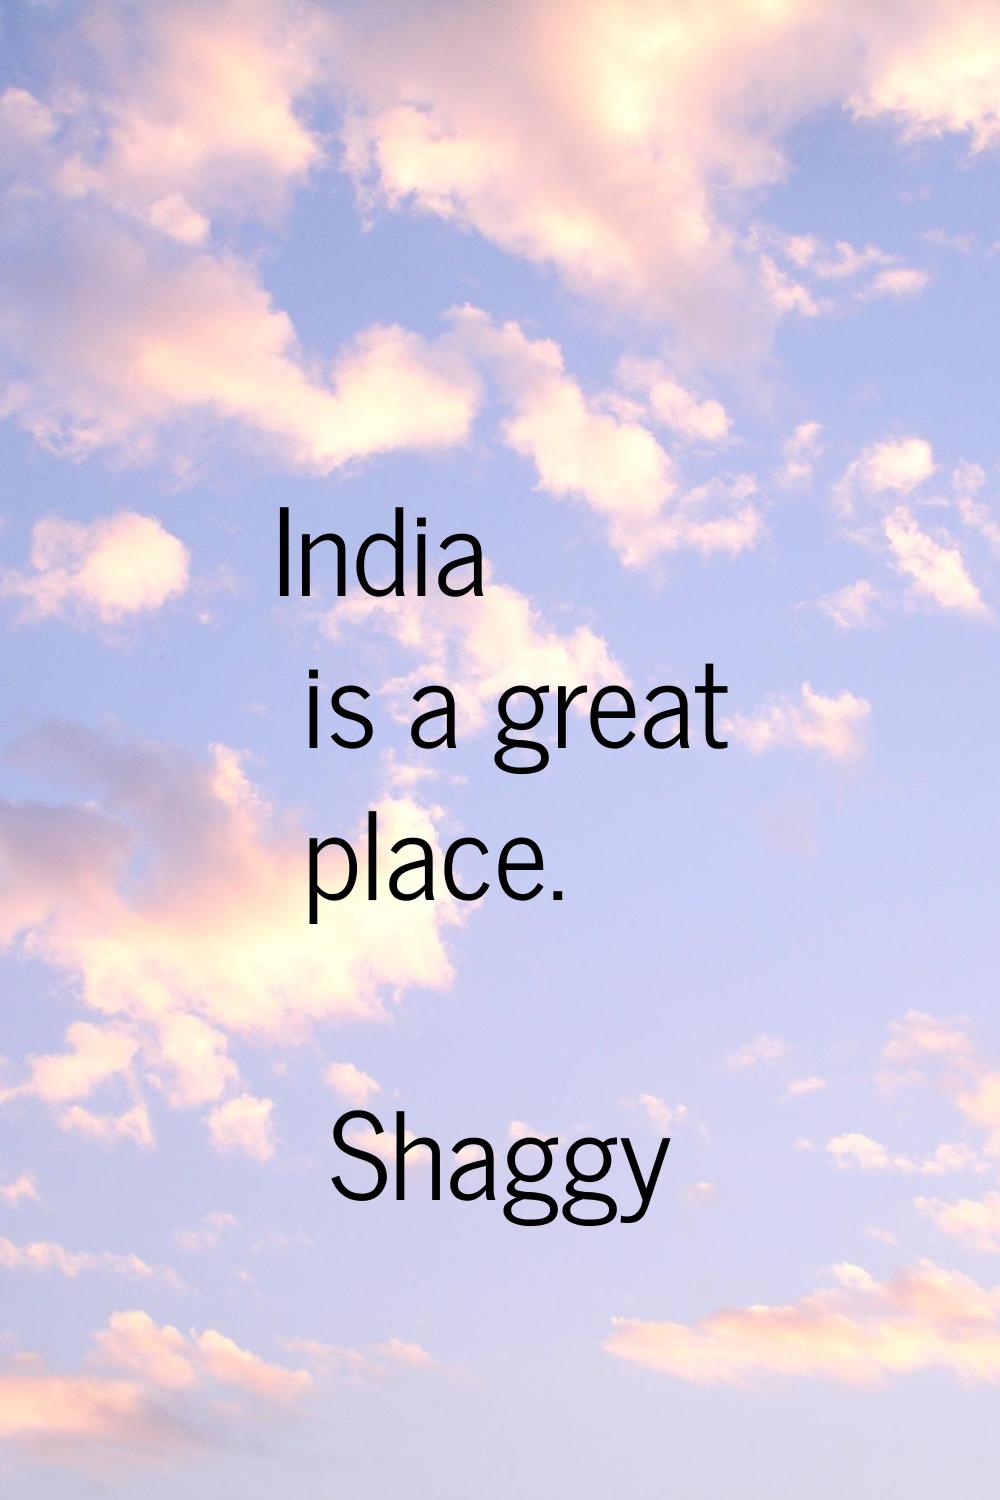 India is a great place.